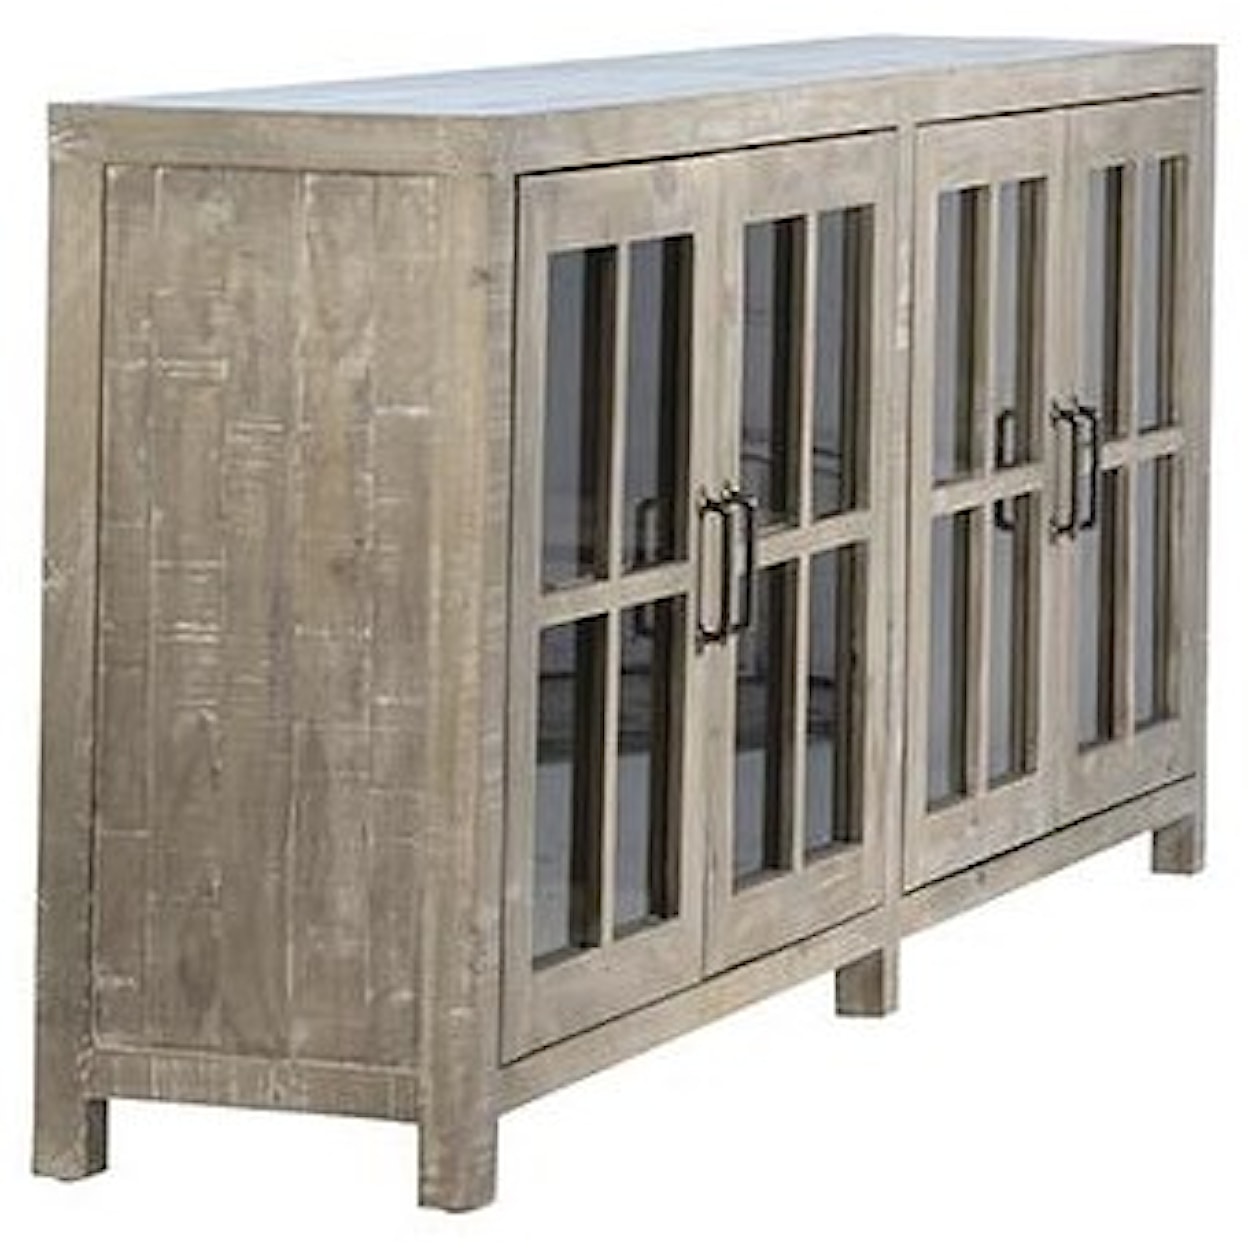 Dovetail Furniture Sideboards/Buffets Marion Sideboard